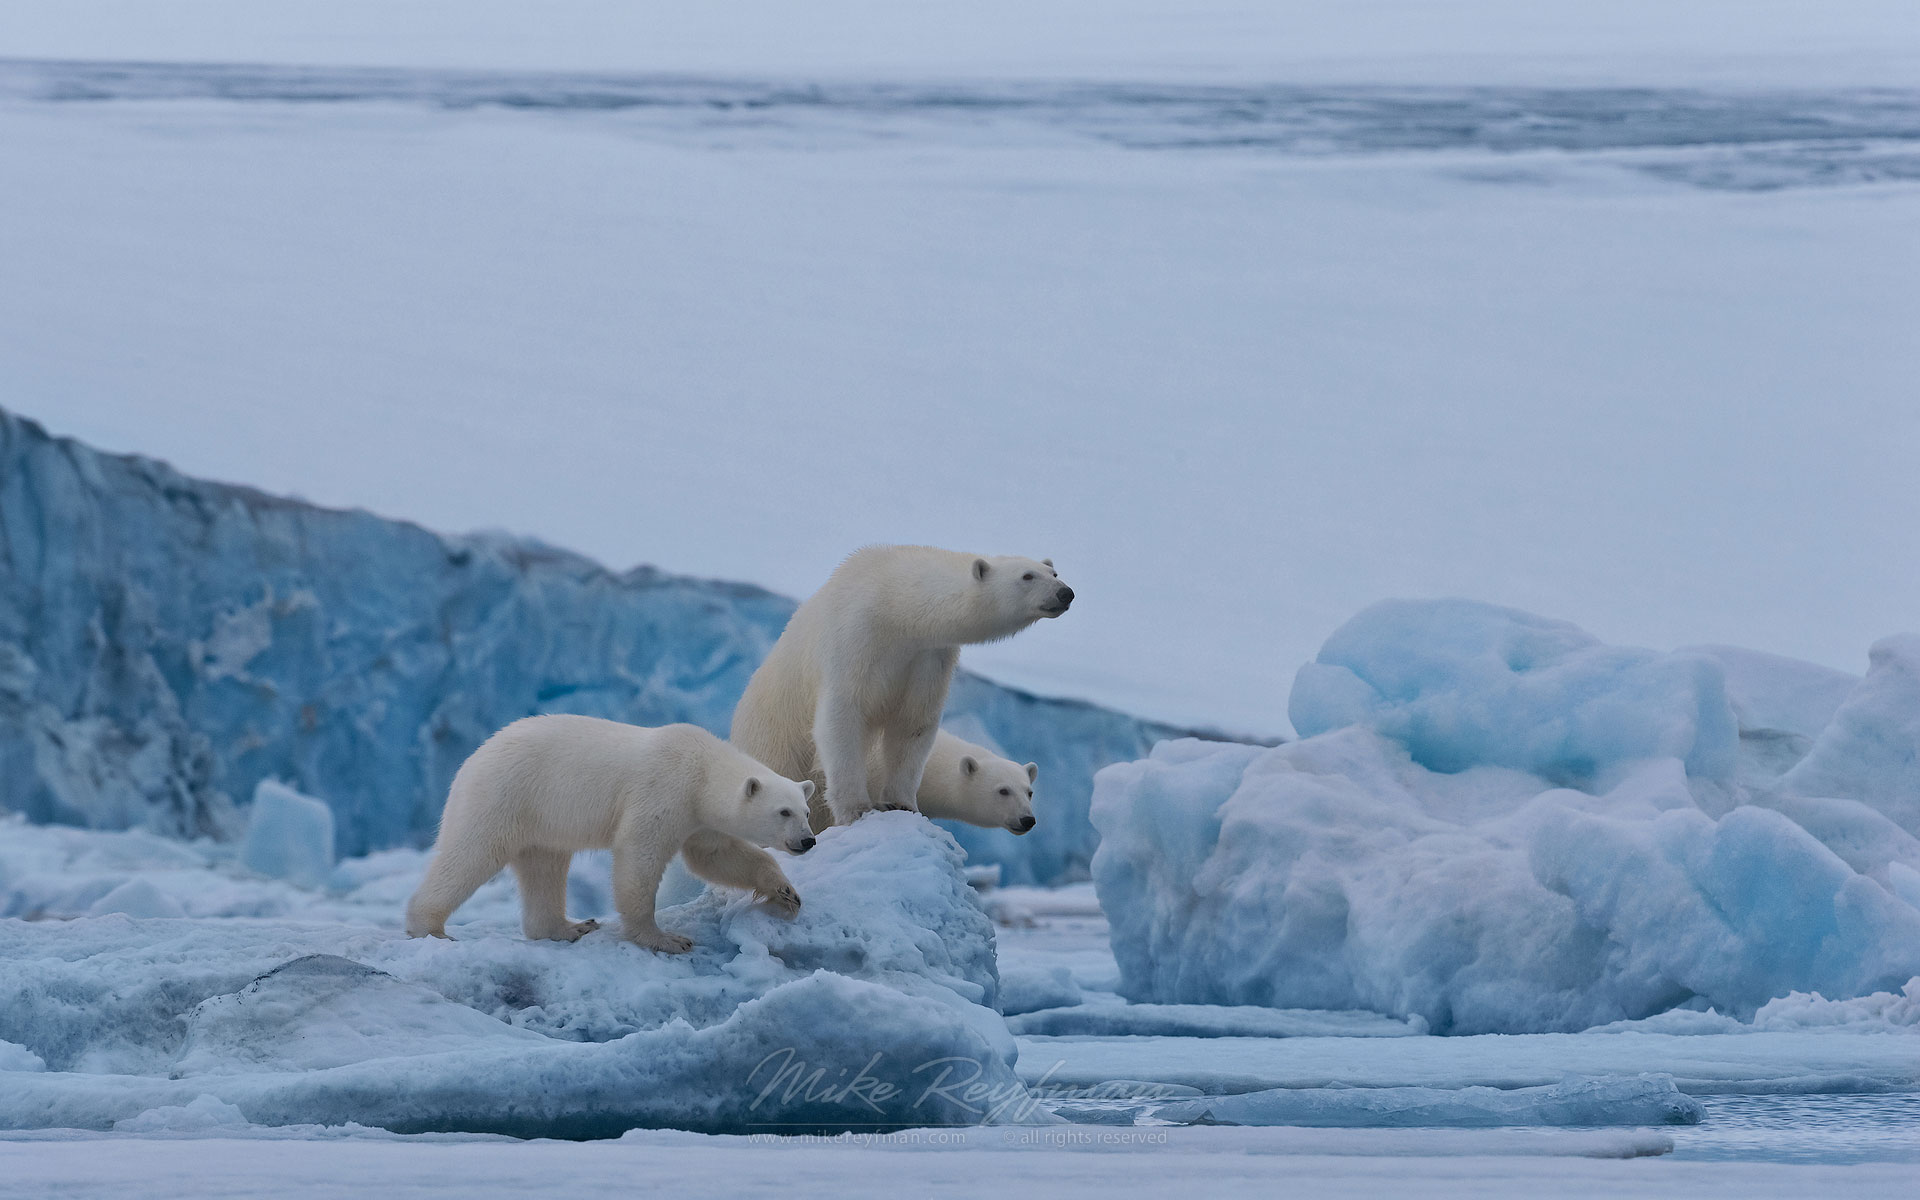 Female polar bear with twin cubs on the pack ice along Spitsbergen coast. Svalbard, Norway. - Polar-Bears-Svalbard-Spitsbergen-Norway - Mike Reyfman Photography